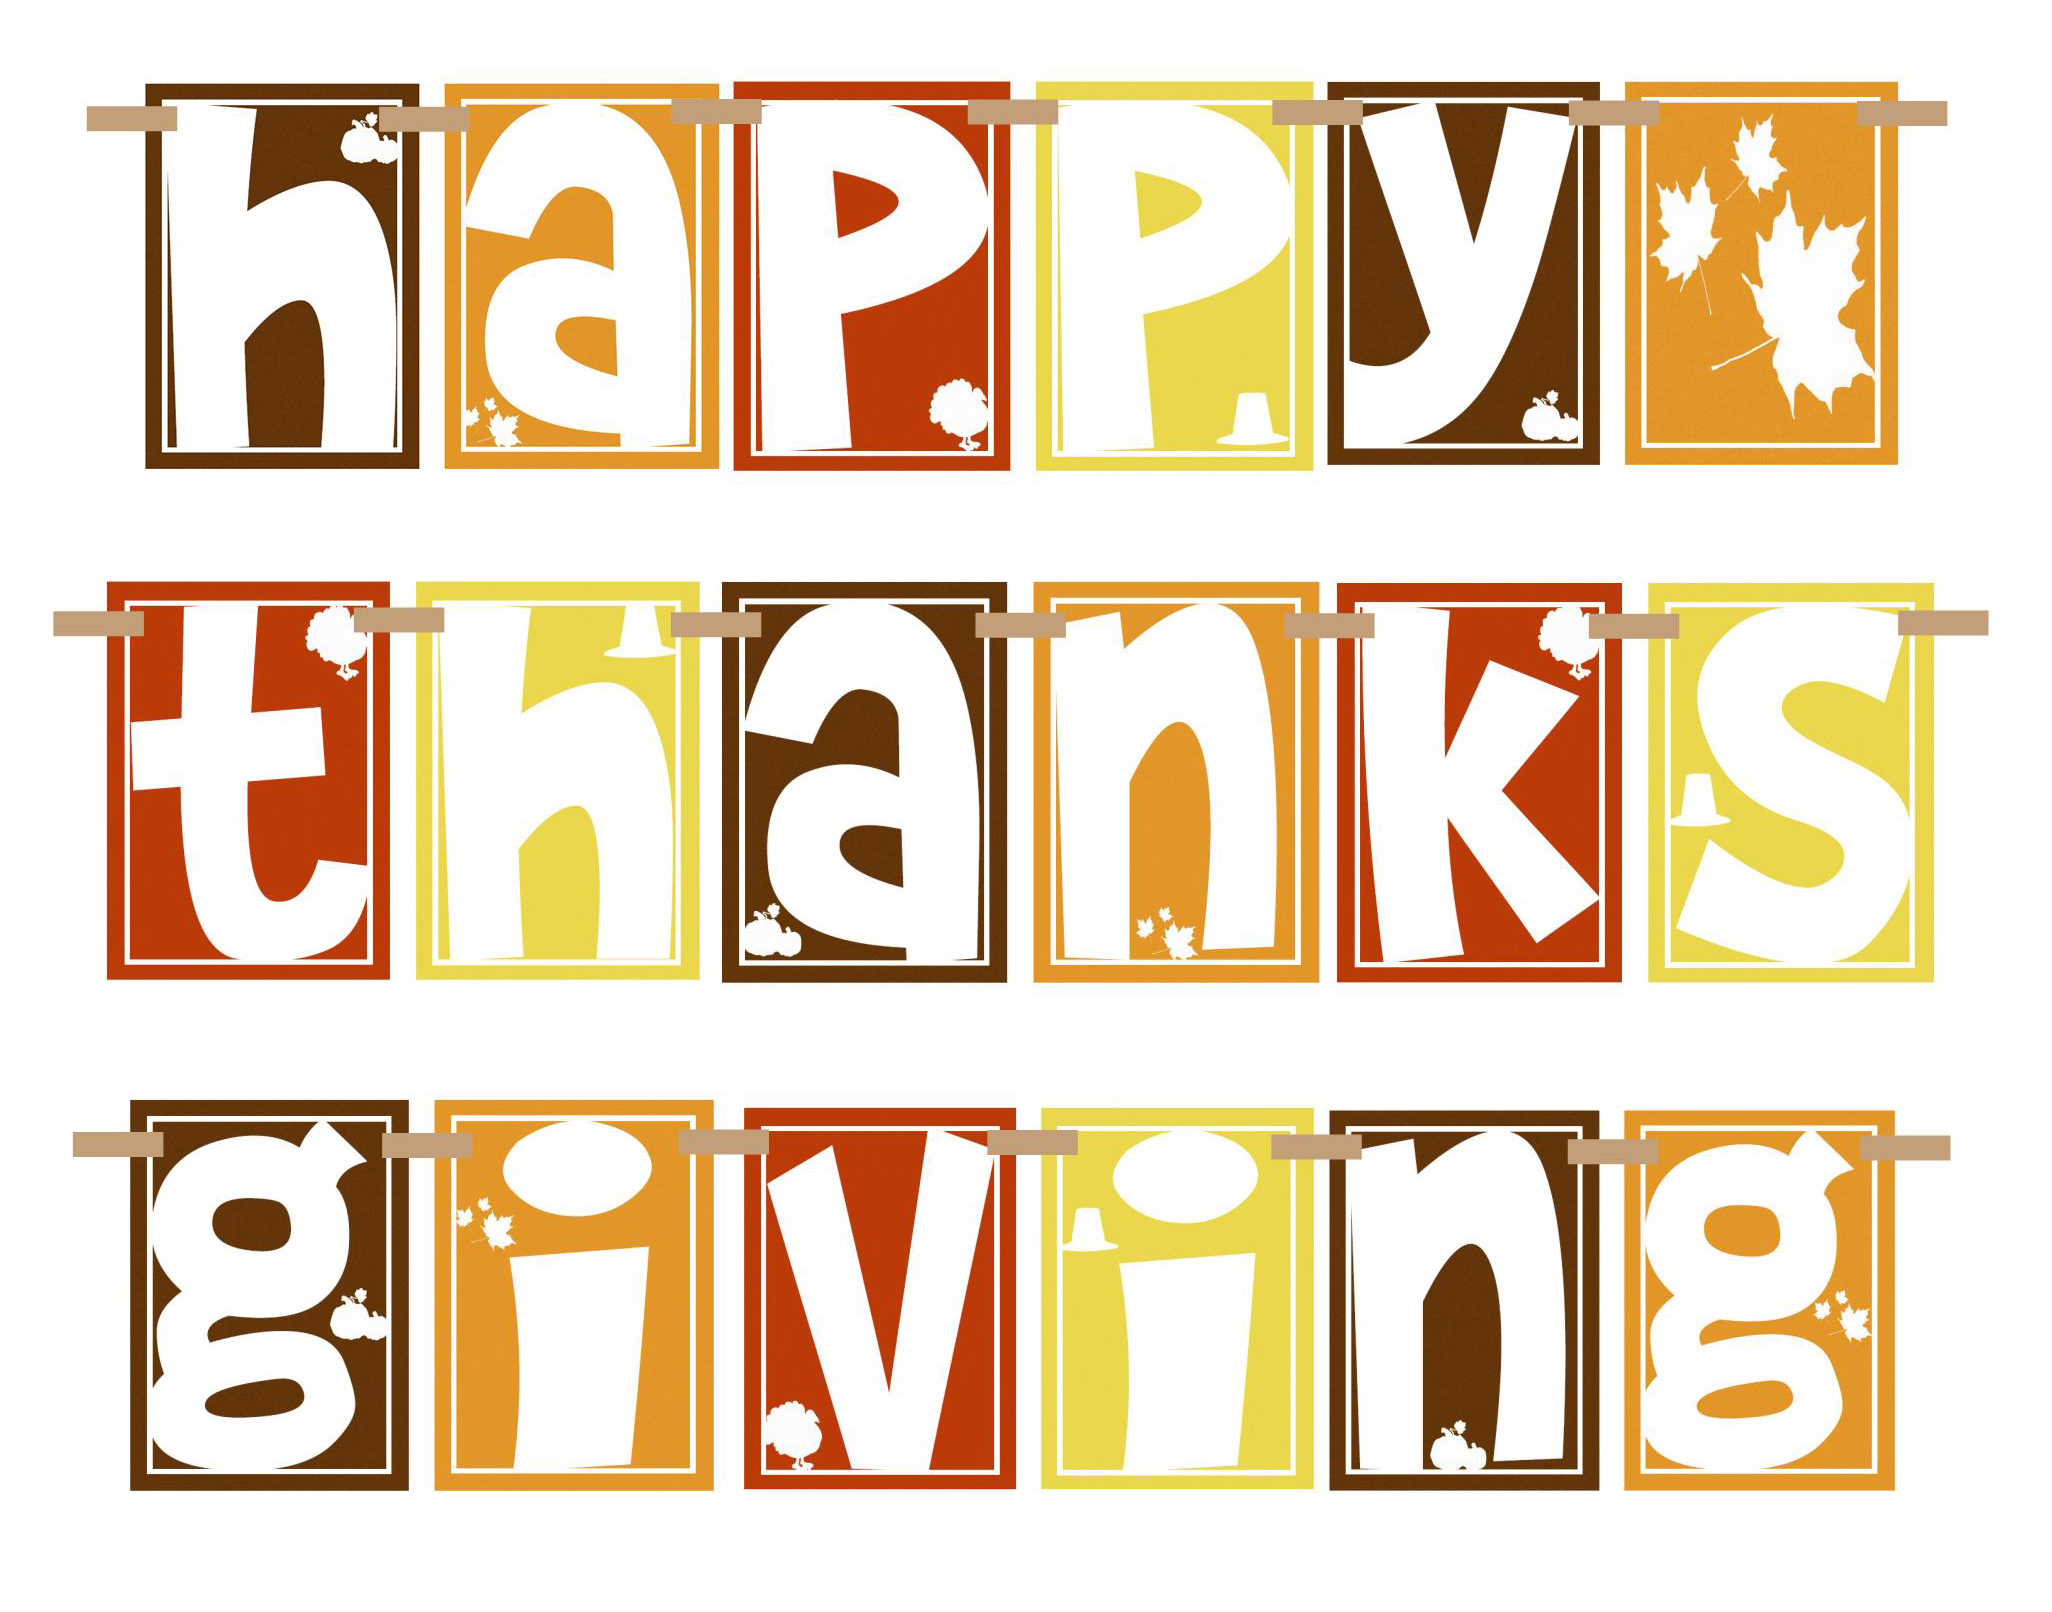 Happy Thanksgiving clipart